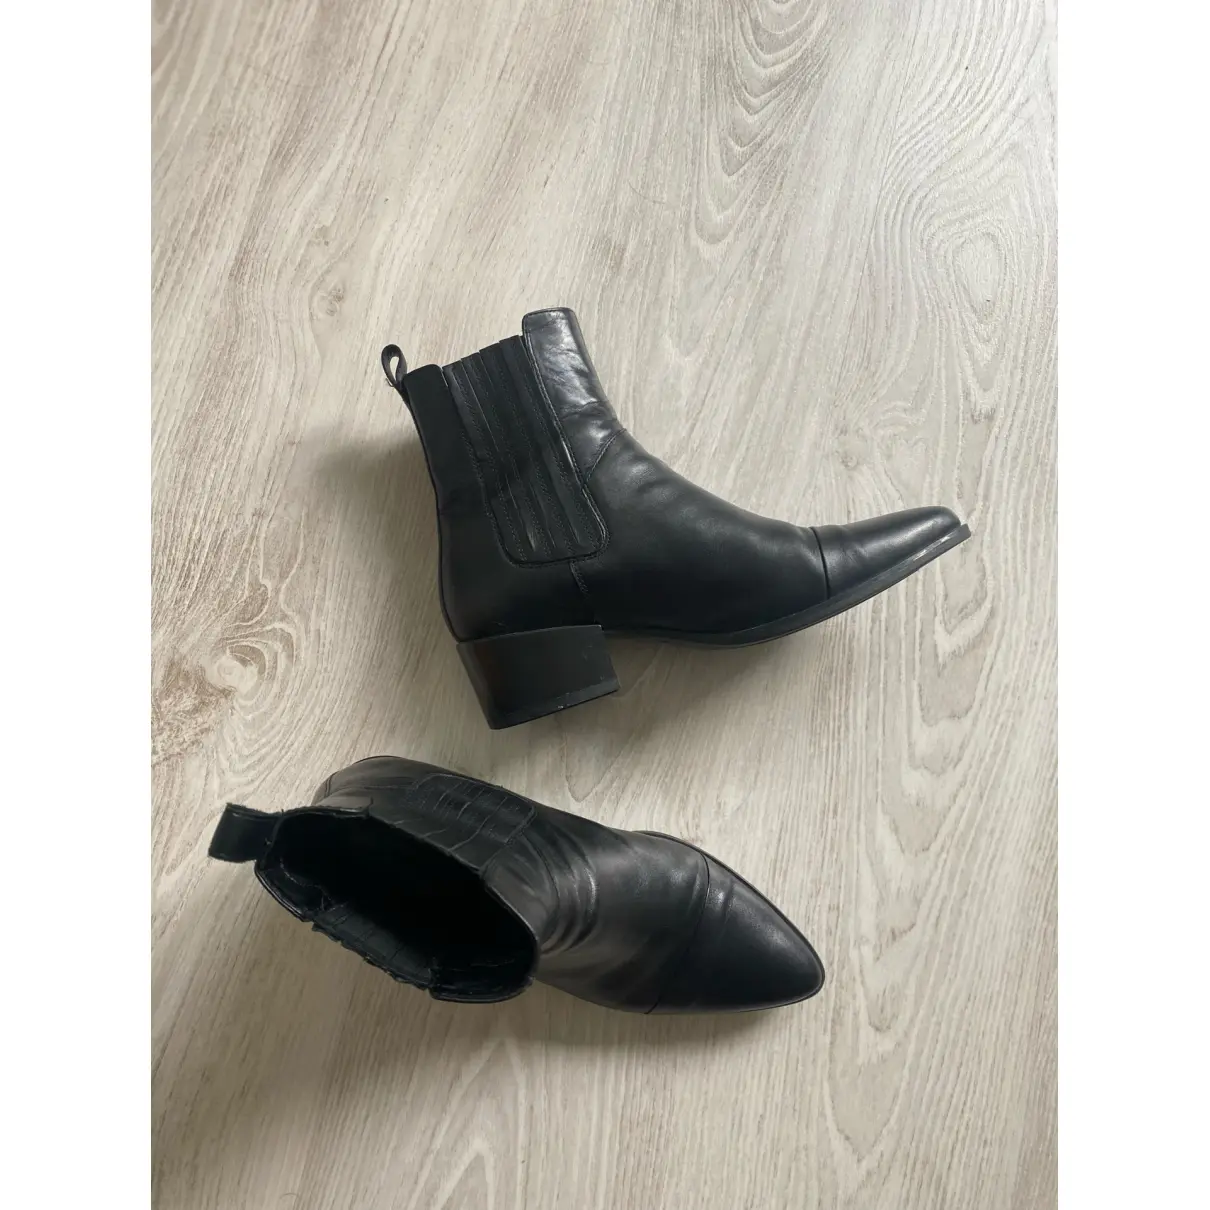 Buy Vagabond Leather ankle boots online